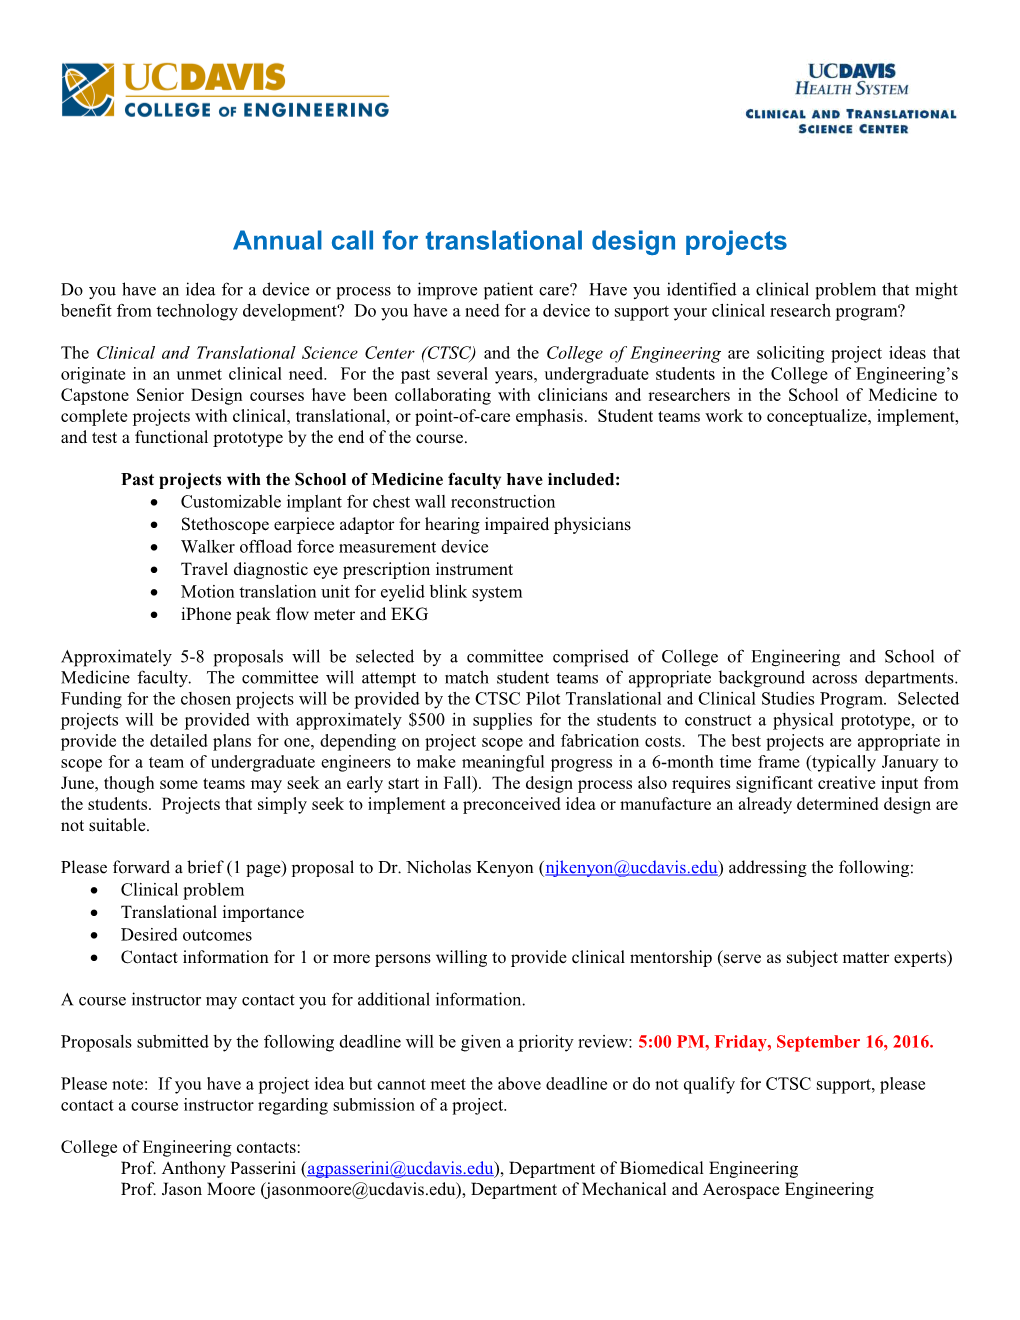 Annual Call for Translational Design Projects